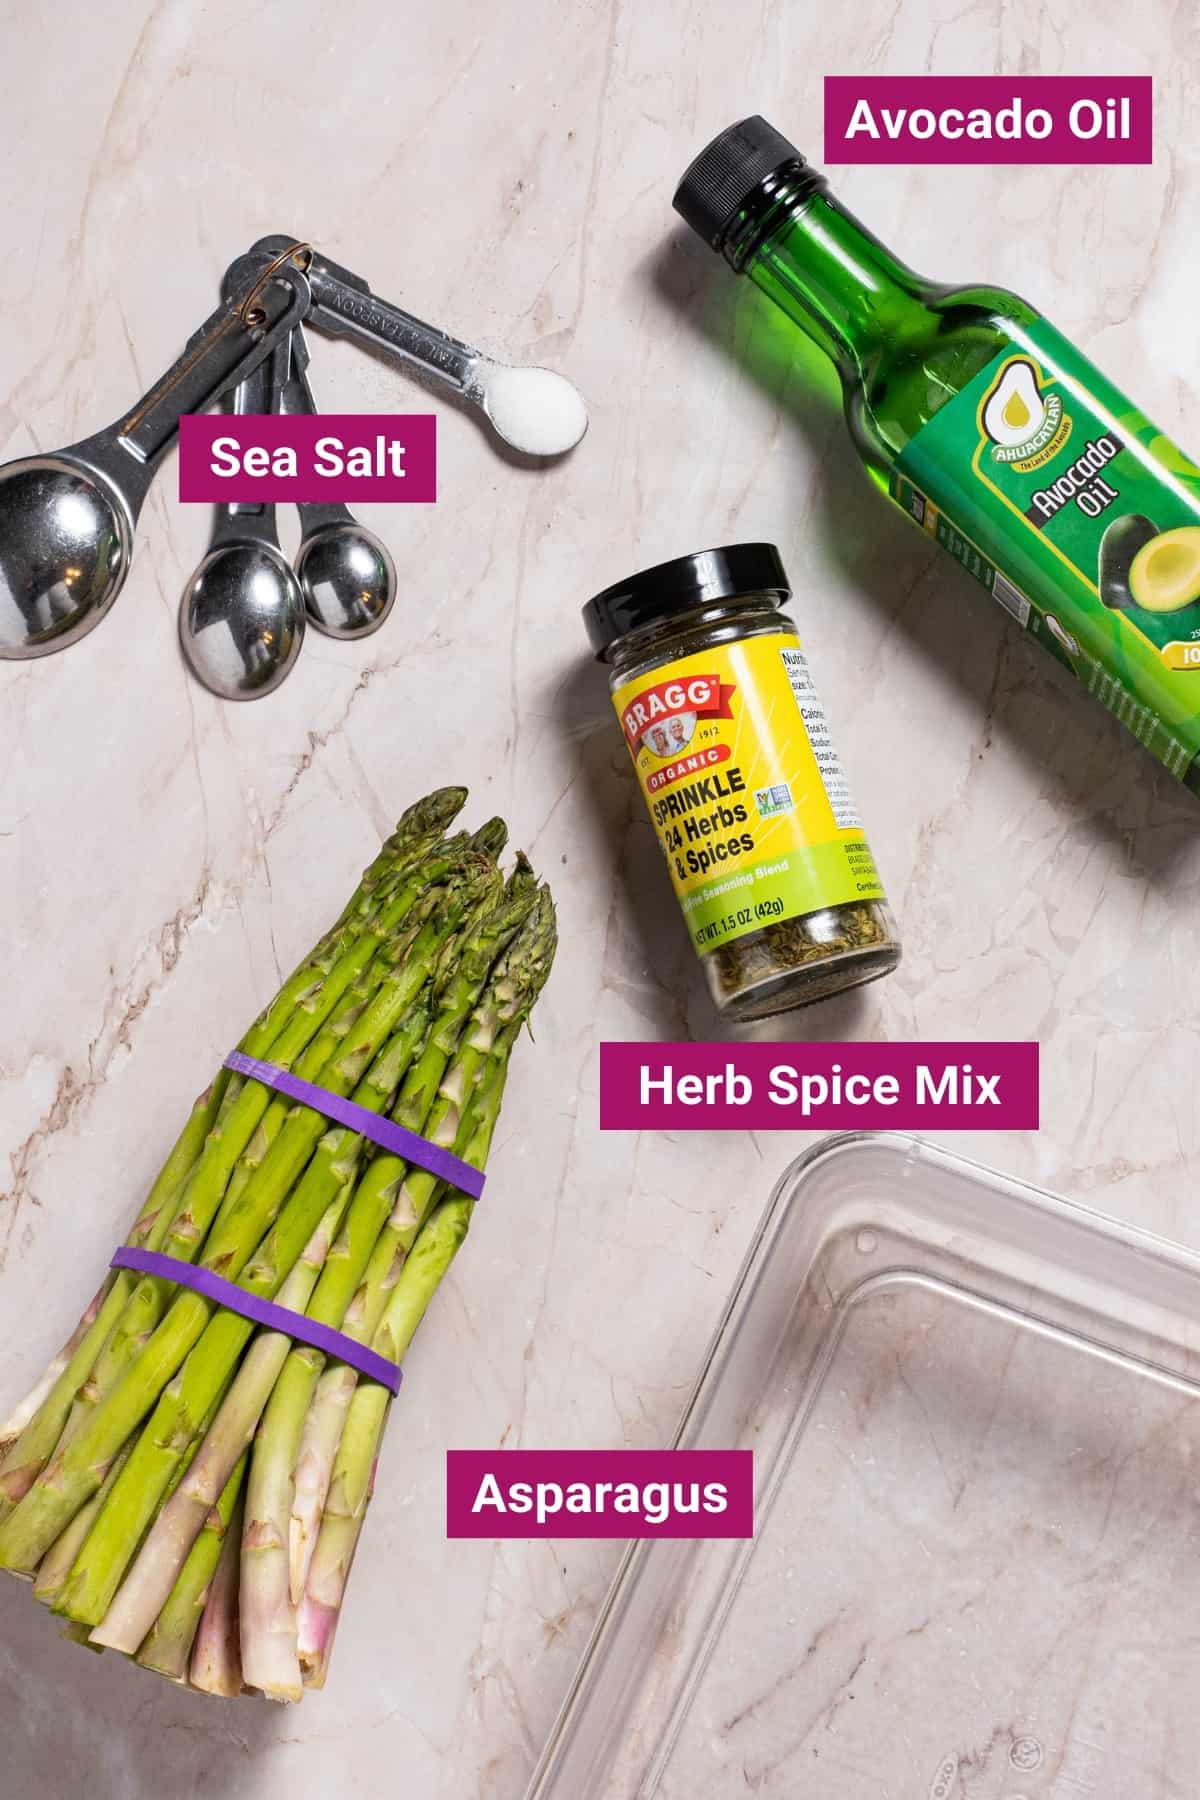 ingredients needed to make air fryer asparagus like raw asparagus, salt, avocado oil, herb seasoning blend, and a shallow dish.